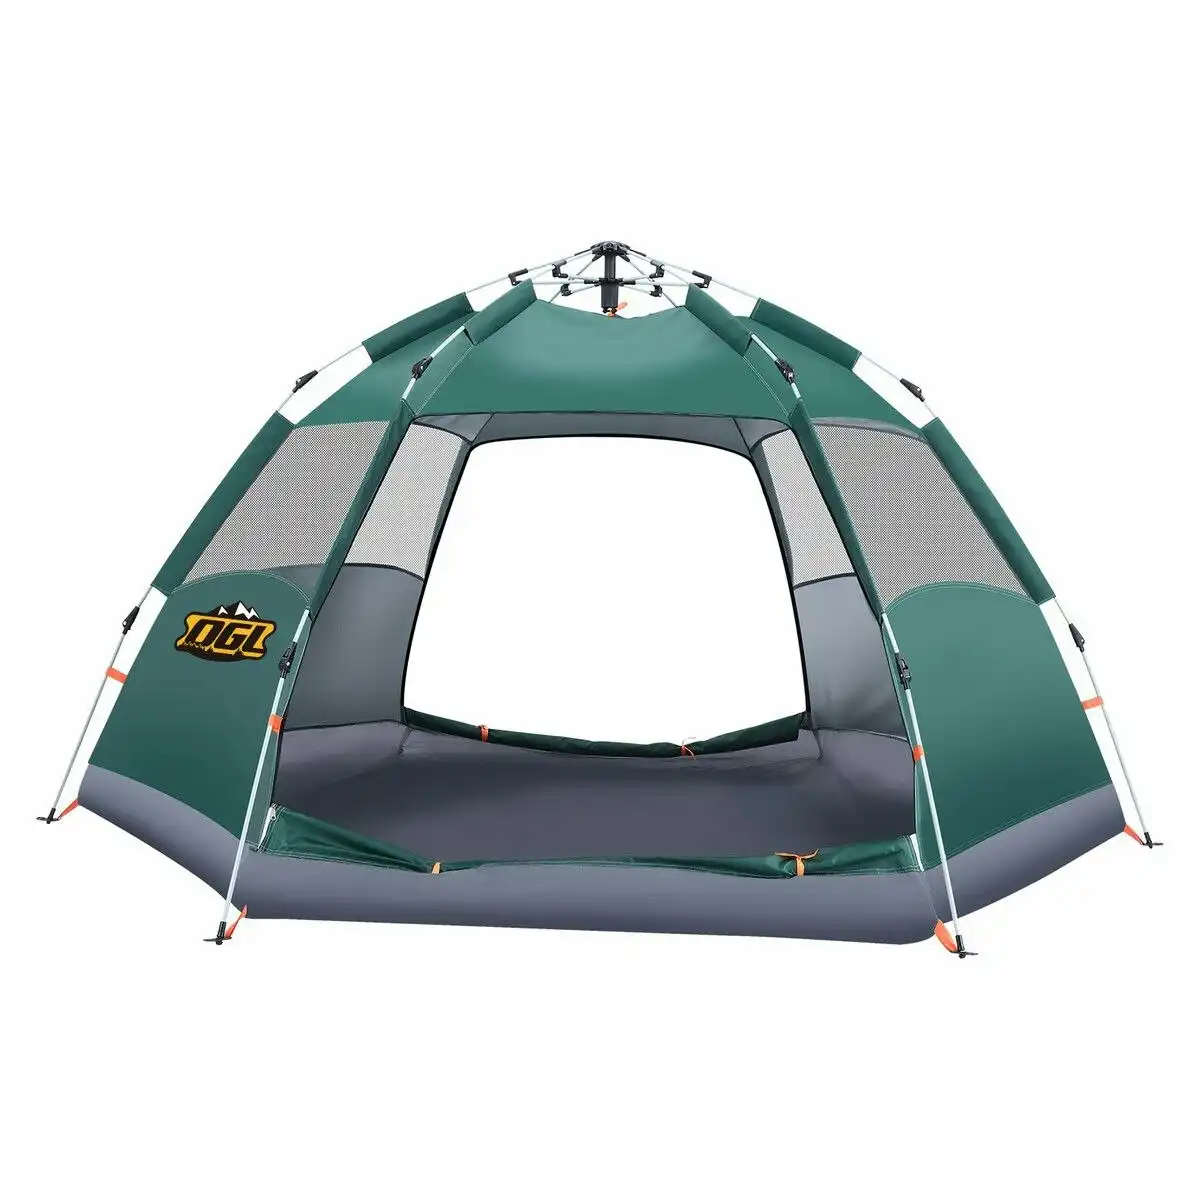 OGL 4 Man Beach Tent Shelter Instant Pop Up Camping Family Dome Sun Shade Hiking Picnic Outdoor 240x240x135cm Green